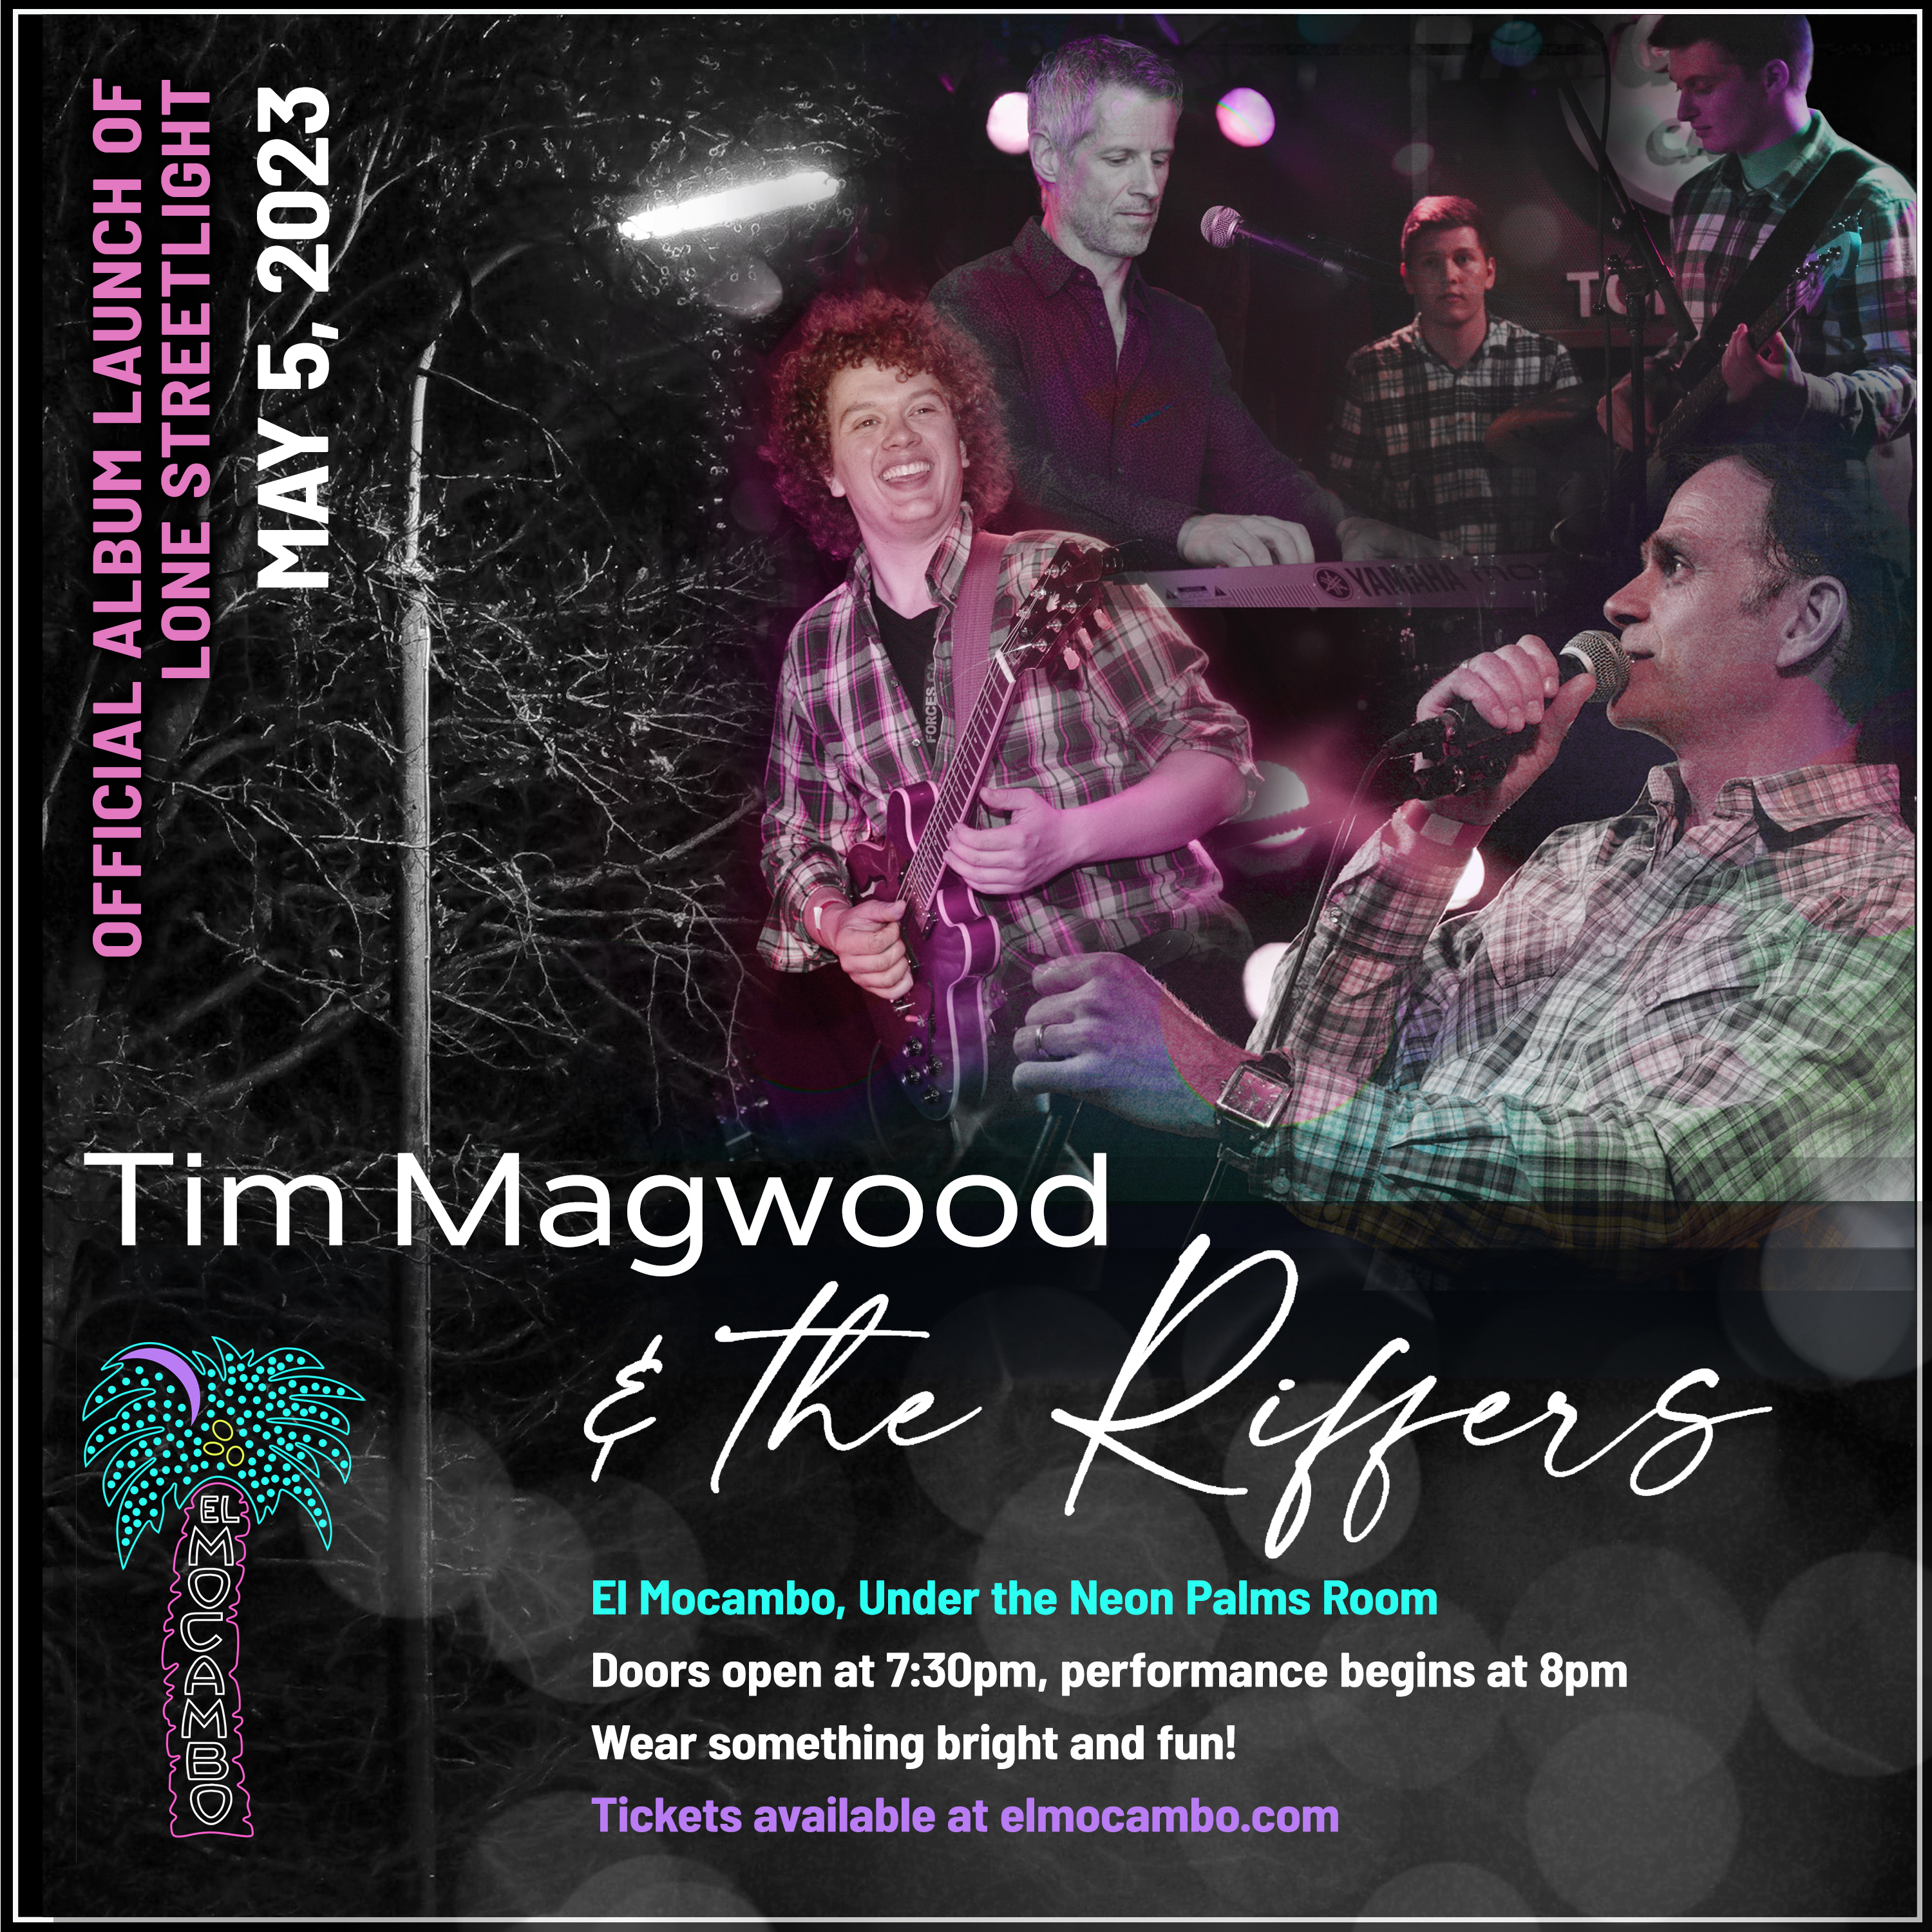 “Lone Streetlight” Album Launch from Tim Magwood & The Riffers